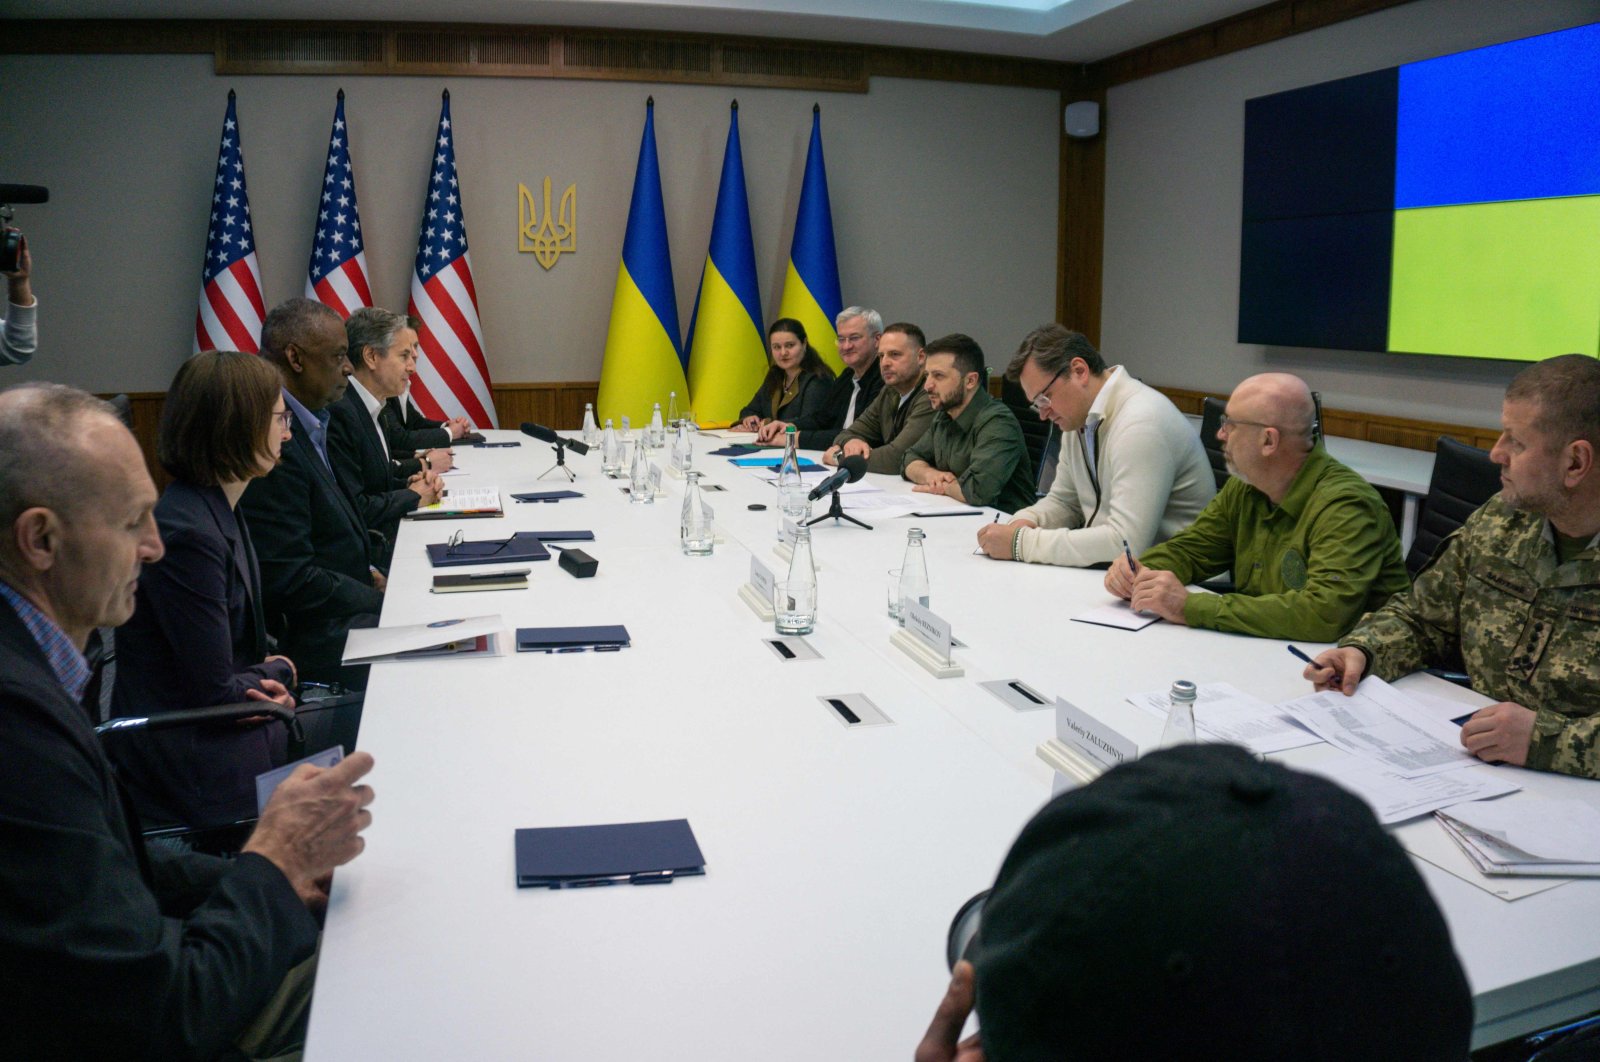 In this image provided by the Department of Defense, Secretary of Defense Lloyd Austin (3L), and Secretary of State Antony Blinken (4L), meet with Ukrainian Foreign Minister Dmytro Kuleba (3R) and Ukrainian President Volodymyr Zelensky (4R), in Kyiv, Ukraine, April 24, 2022. (Photo by U.S. Department of Defense / AFP)